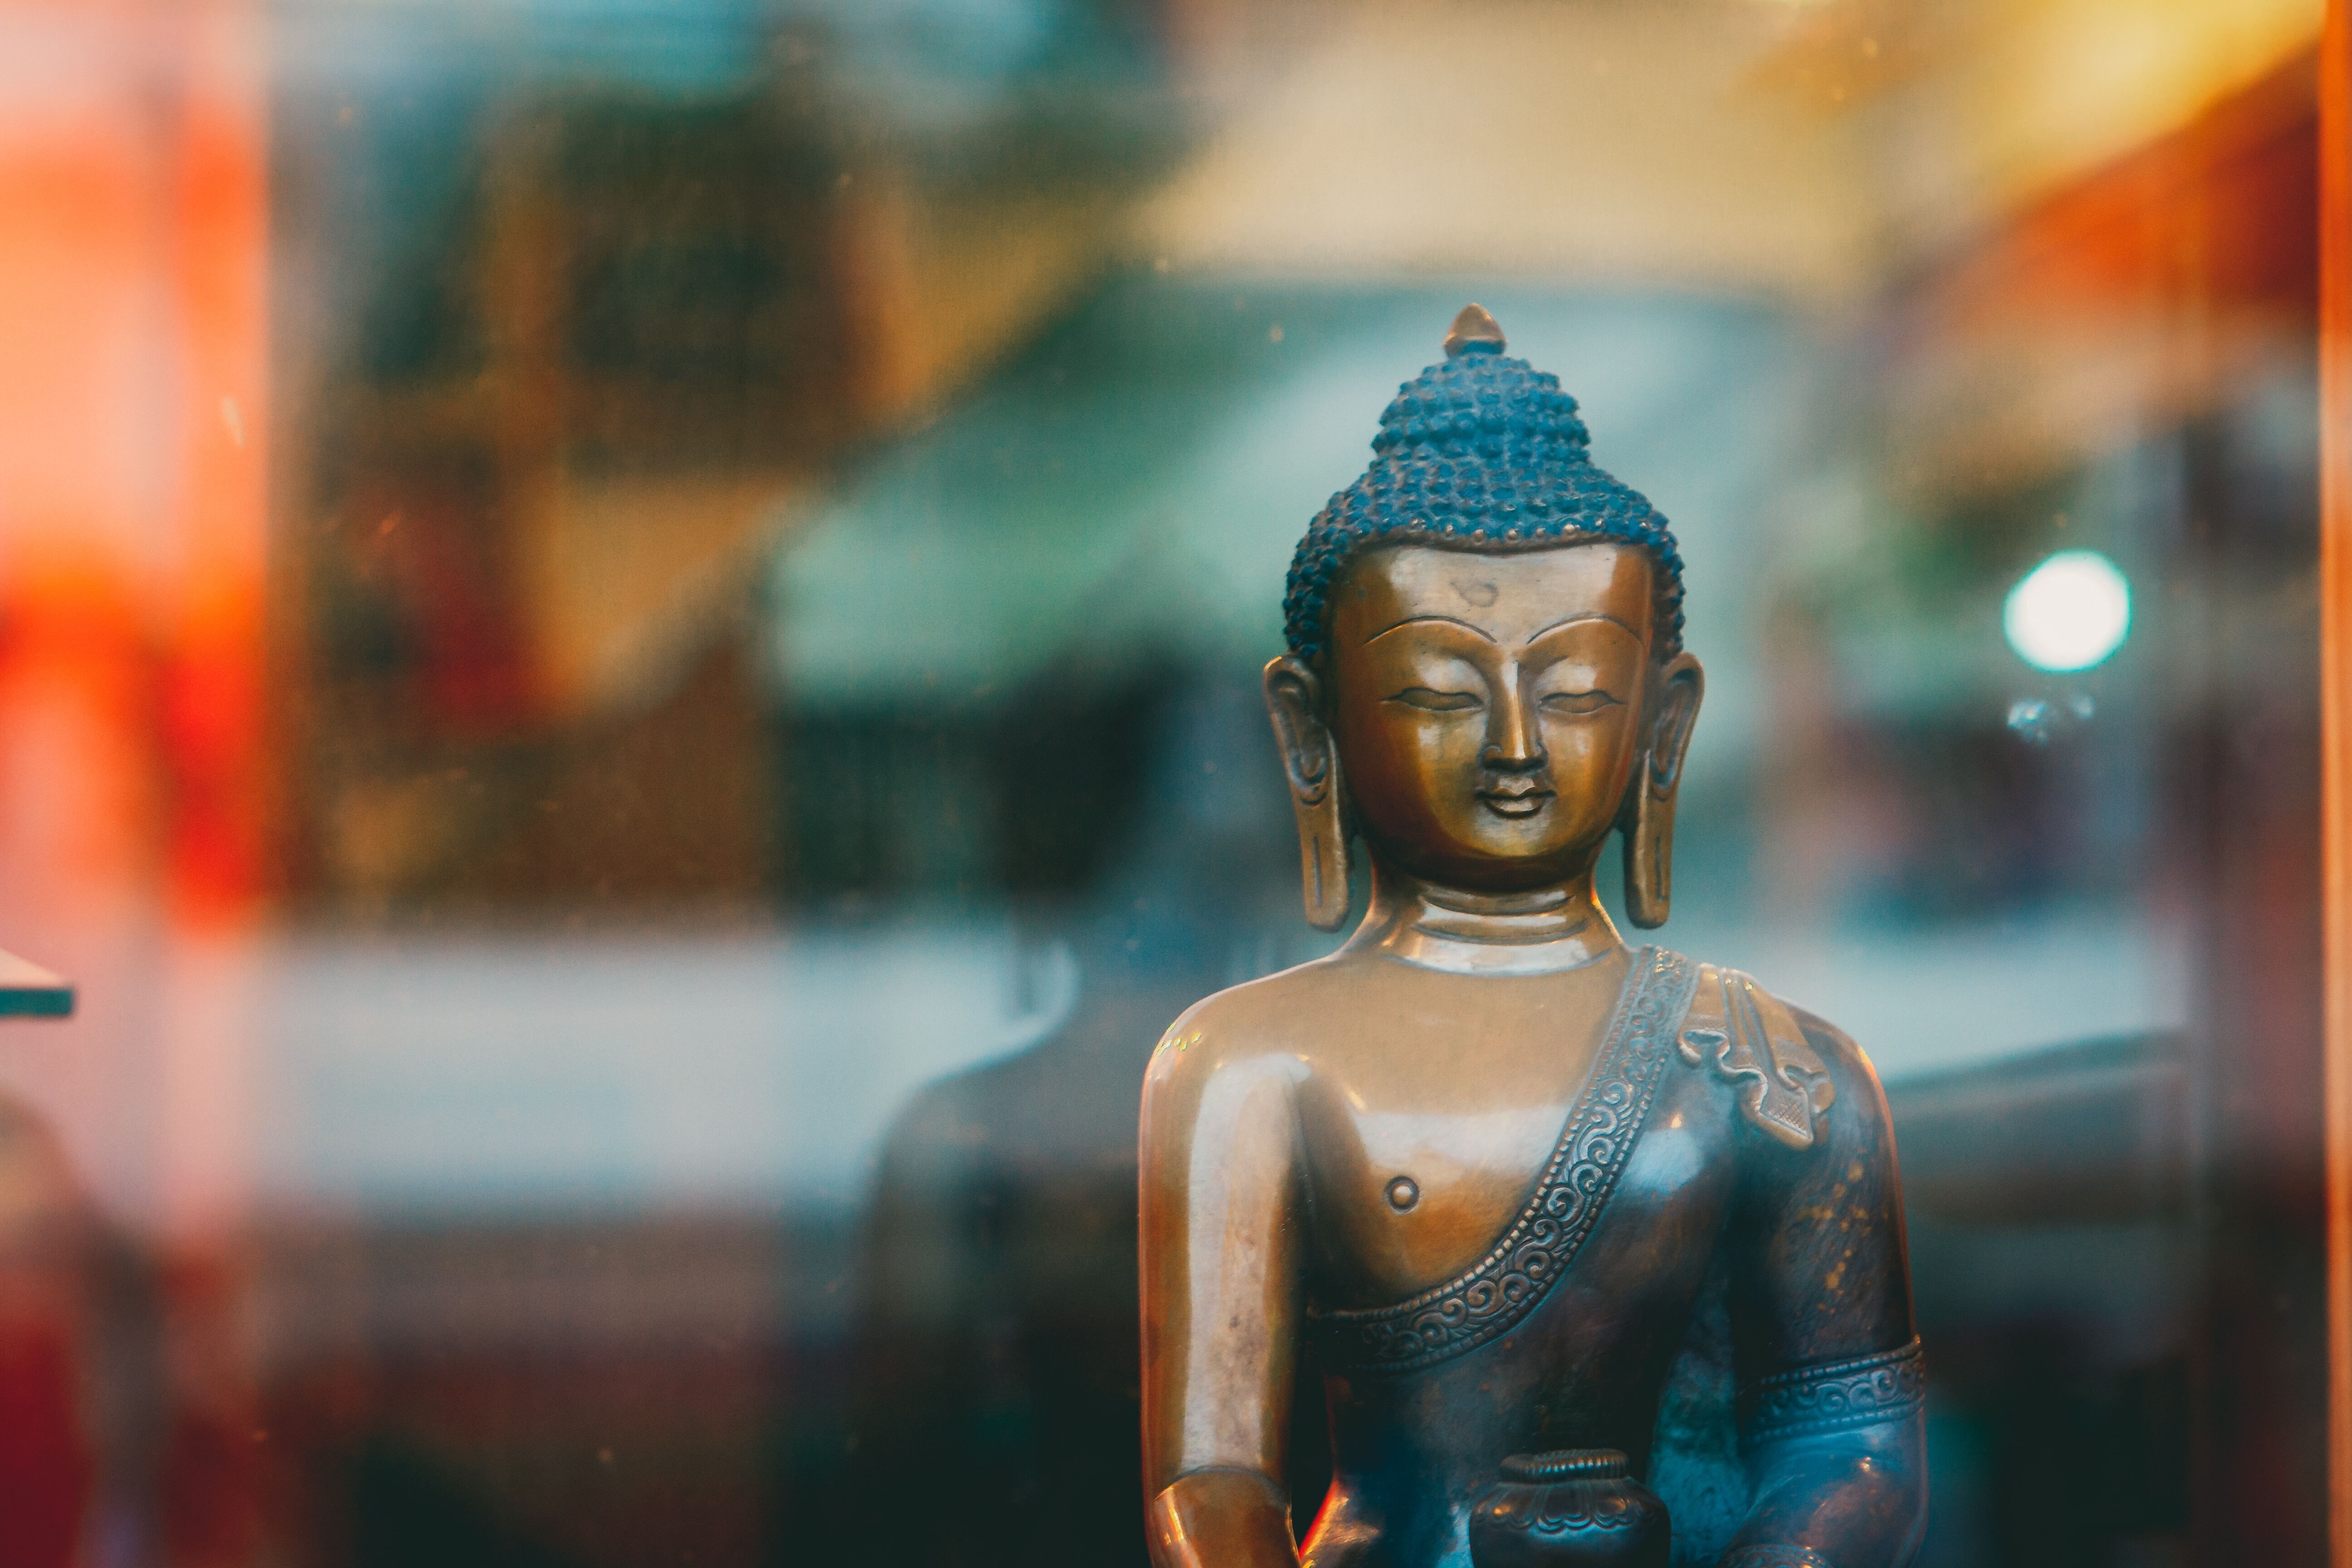 Image of Buddha statue in the window with glare on the glass.